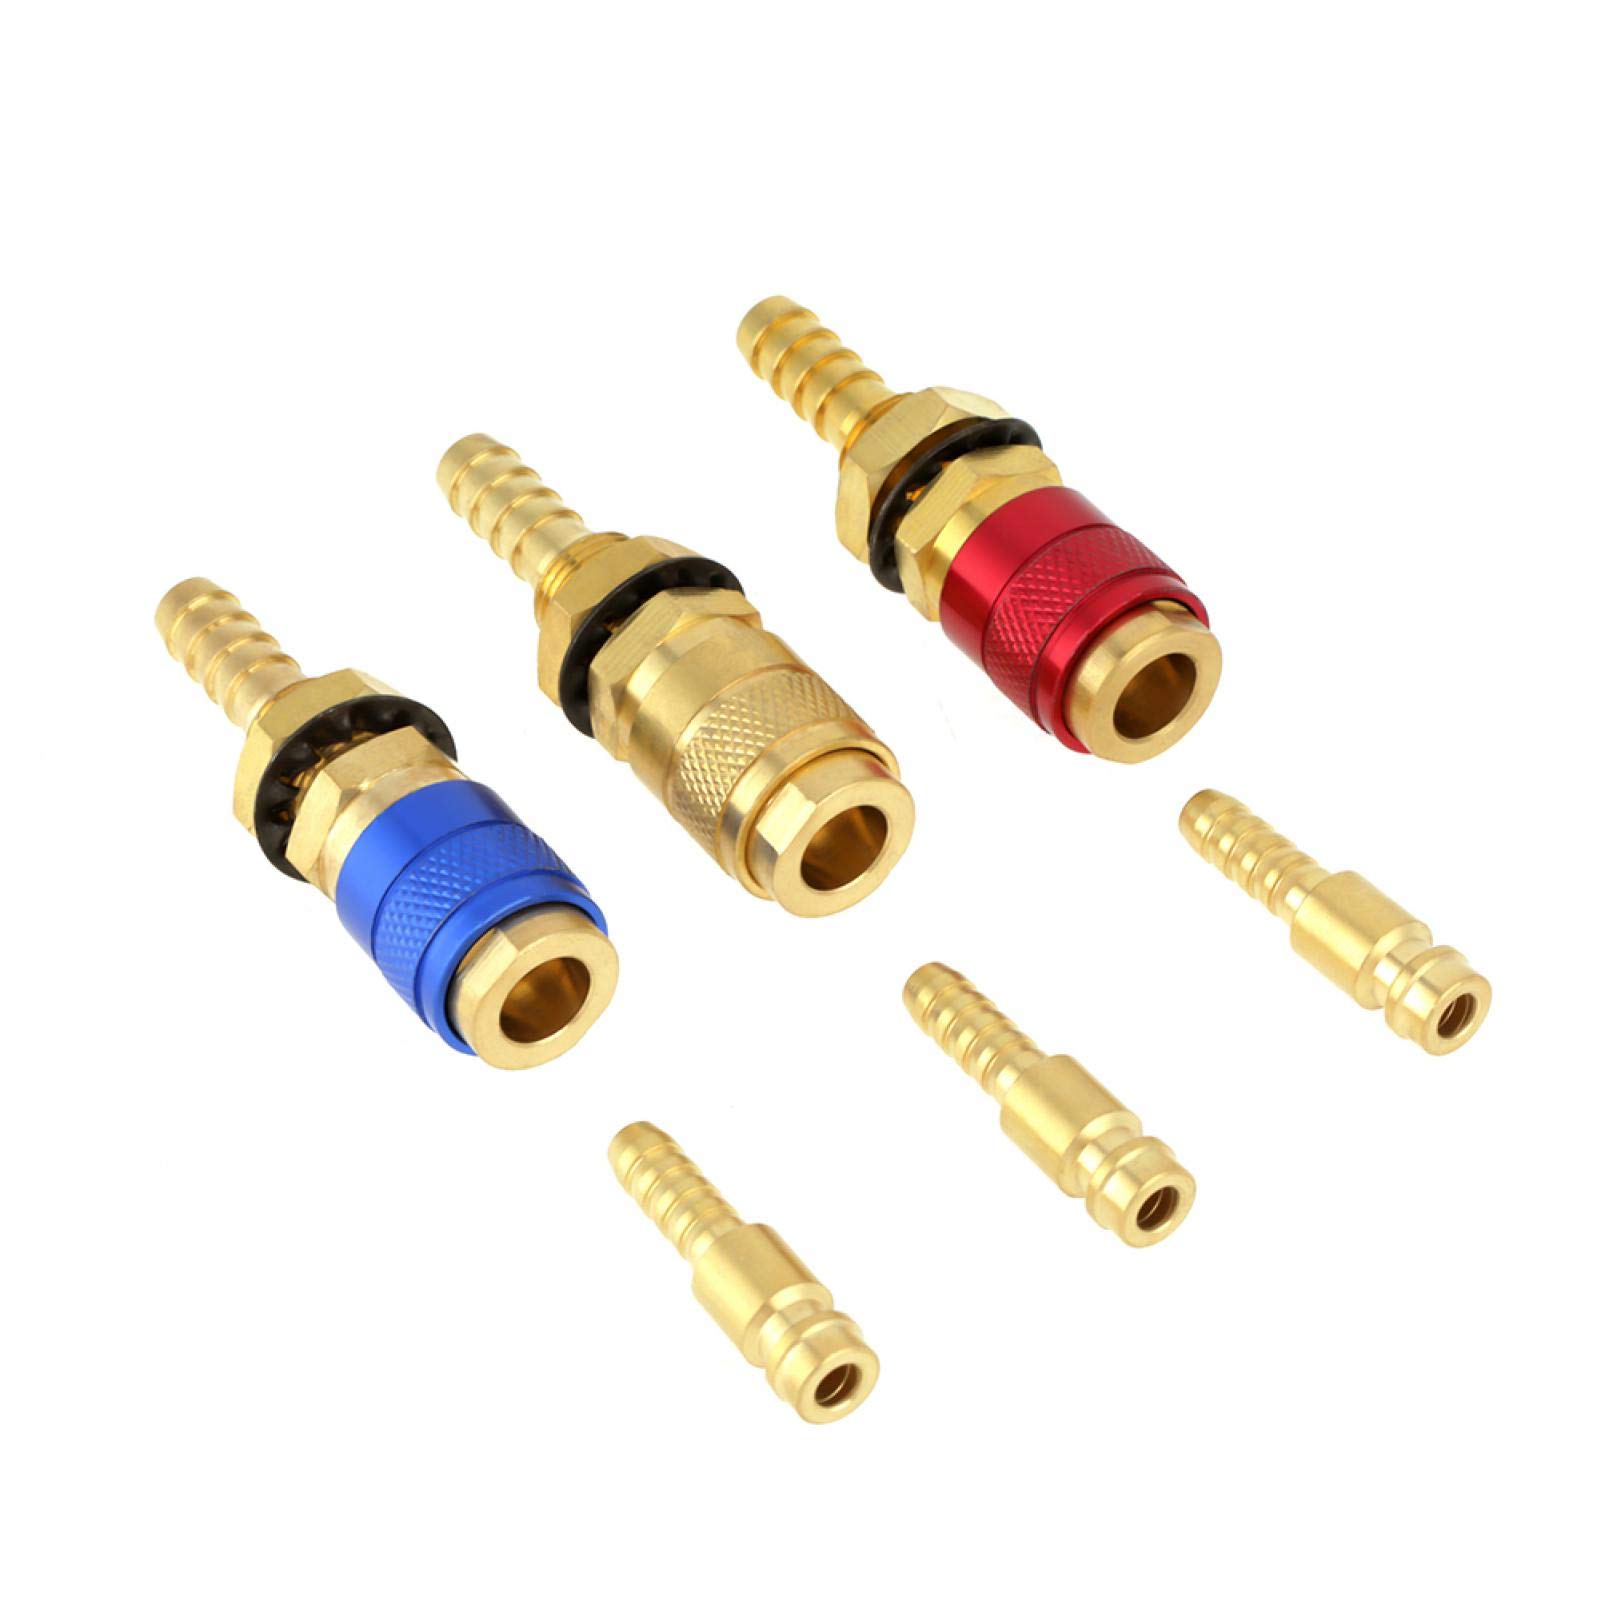 3Pcs Quick Connectors 8mm Brass Connector Fitting Water Cooled & Gas Adapter Argon Quick Connect Fittings for TIG Welding Torch